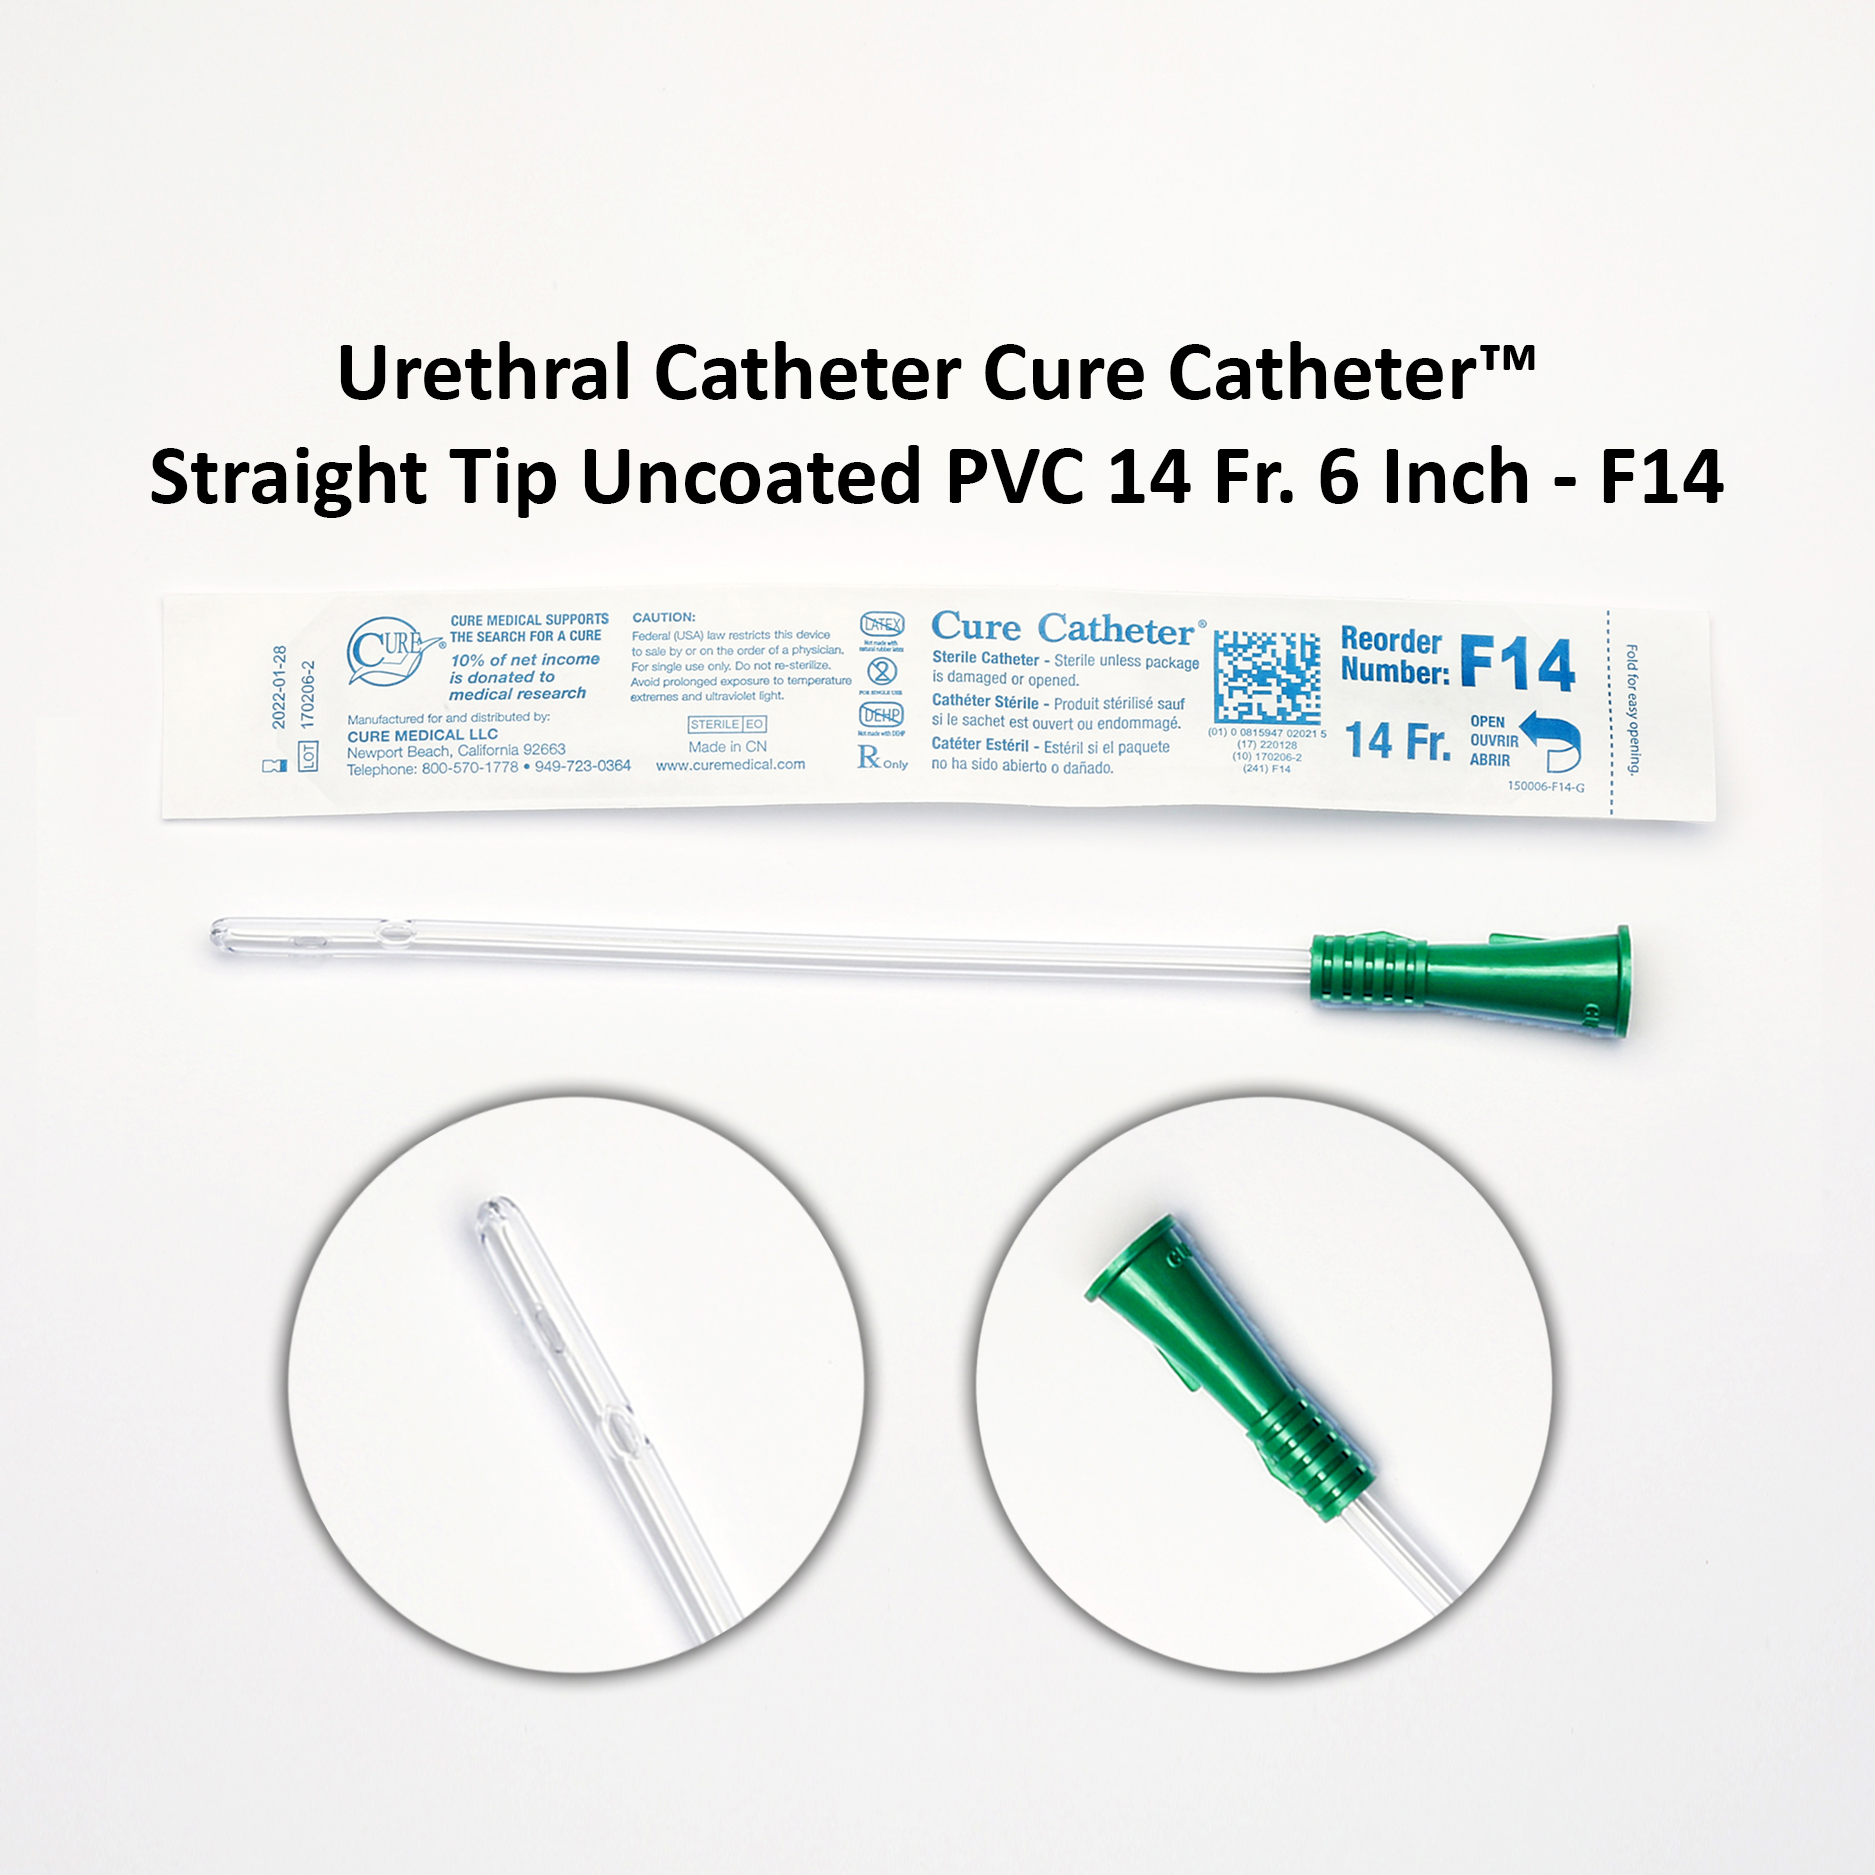 Urethral Catheter Cure Catheter™ Straight Tip Uncoated PVC 14 Fr. 6 Inch - F14